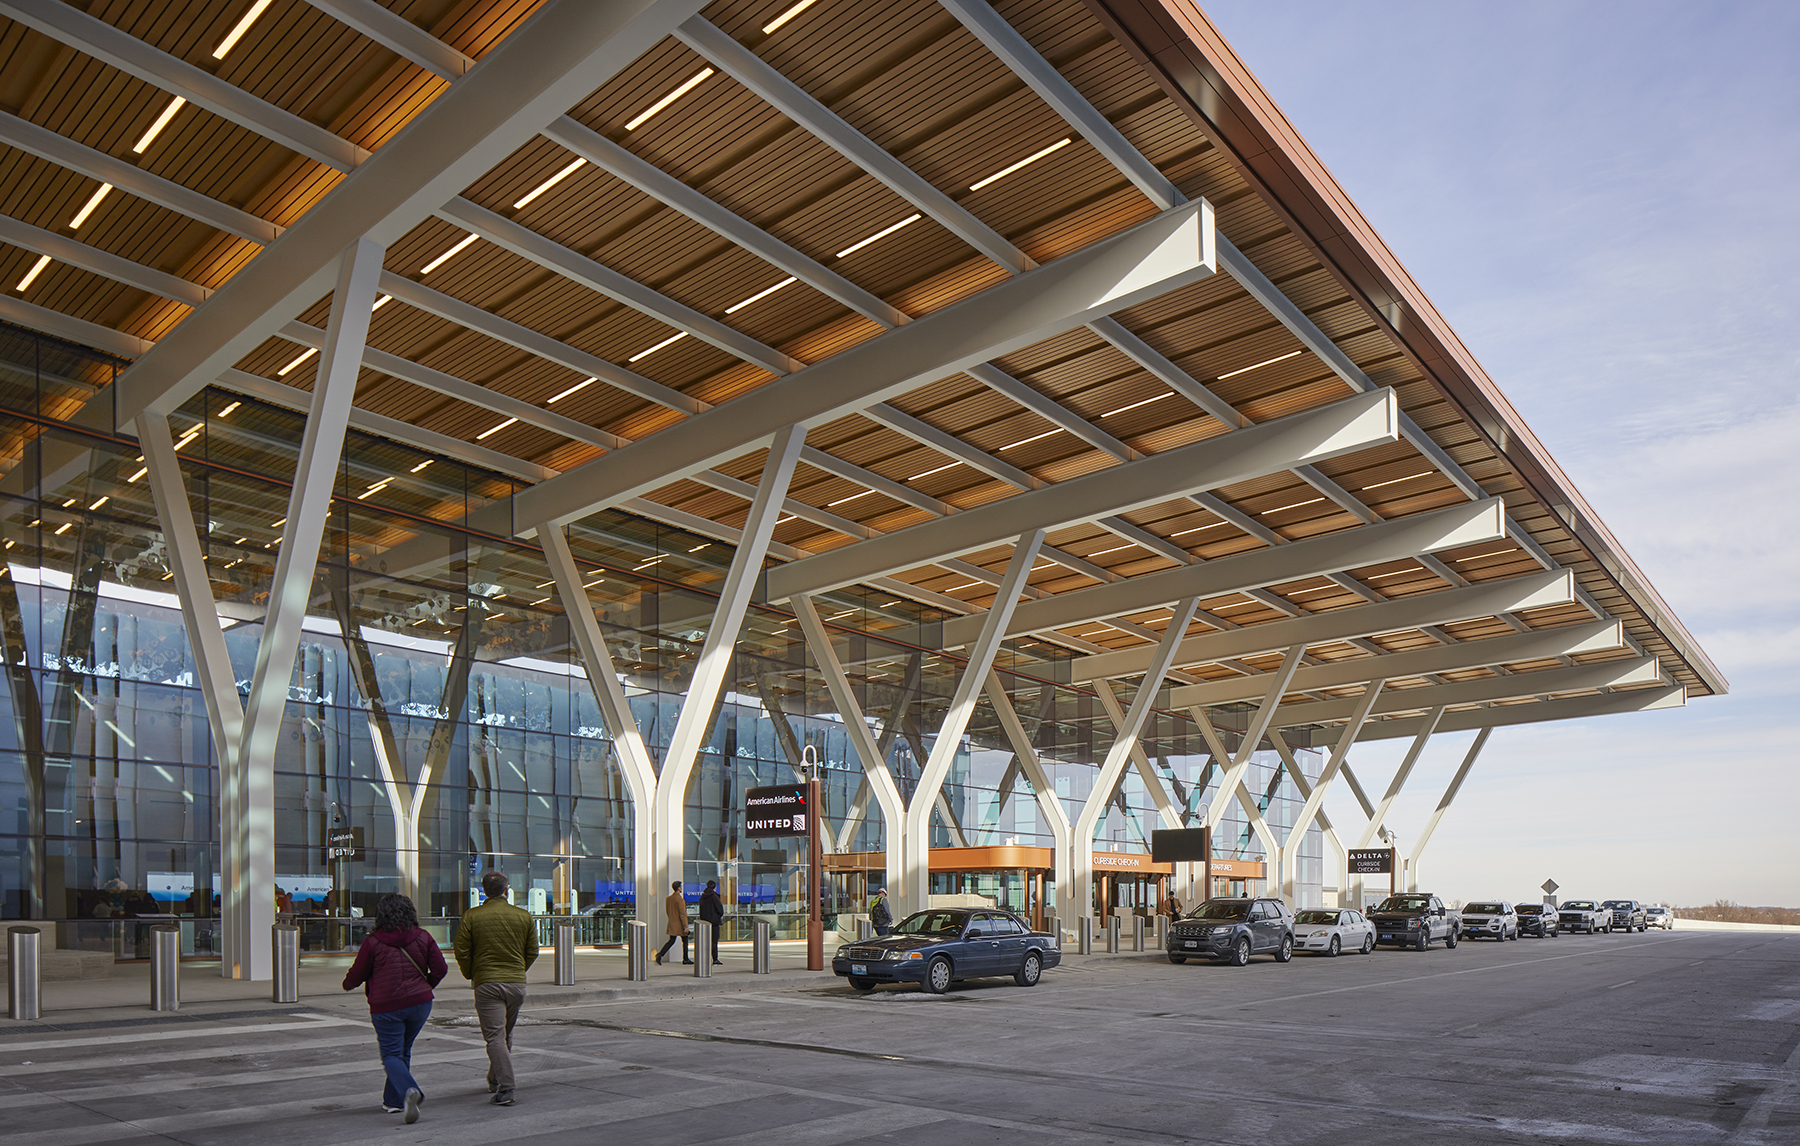 The signature design motif of the 1.1 million sq ft new terminal project is a roof that cantilevers 35 ft out from the arrivals hall. (Image courtesy of Lucas Blair Simpson/© SOM)